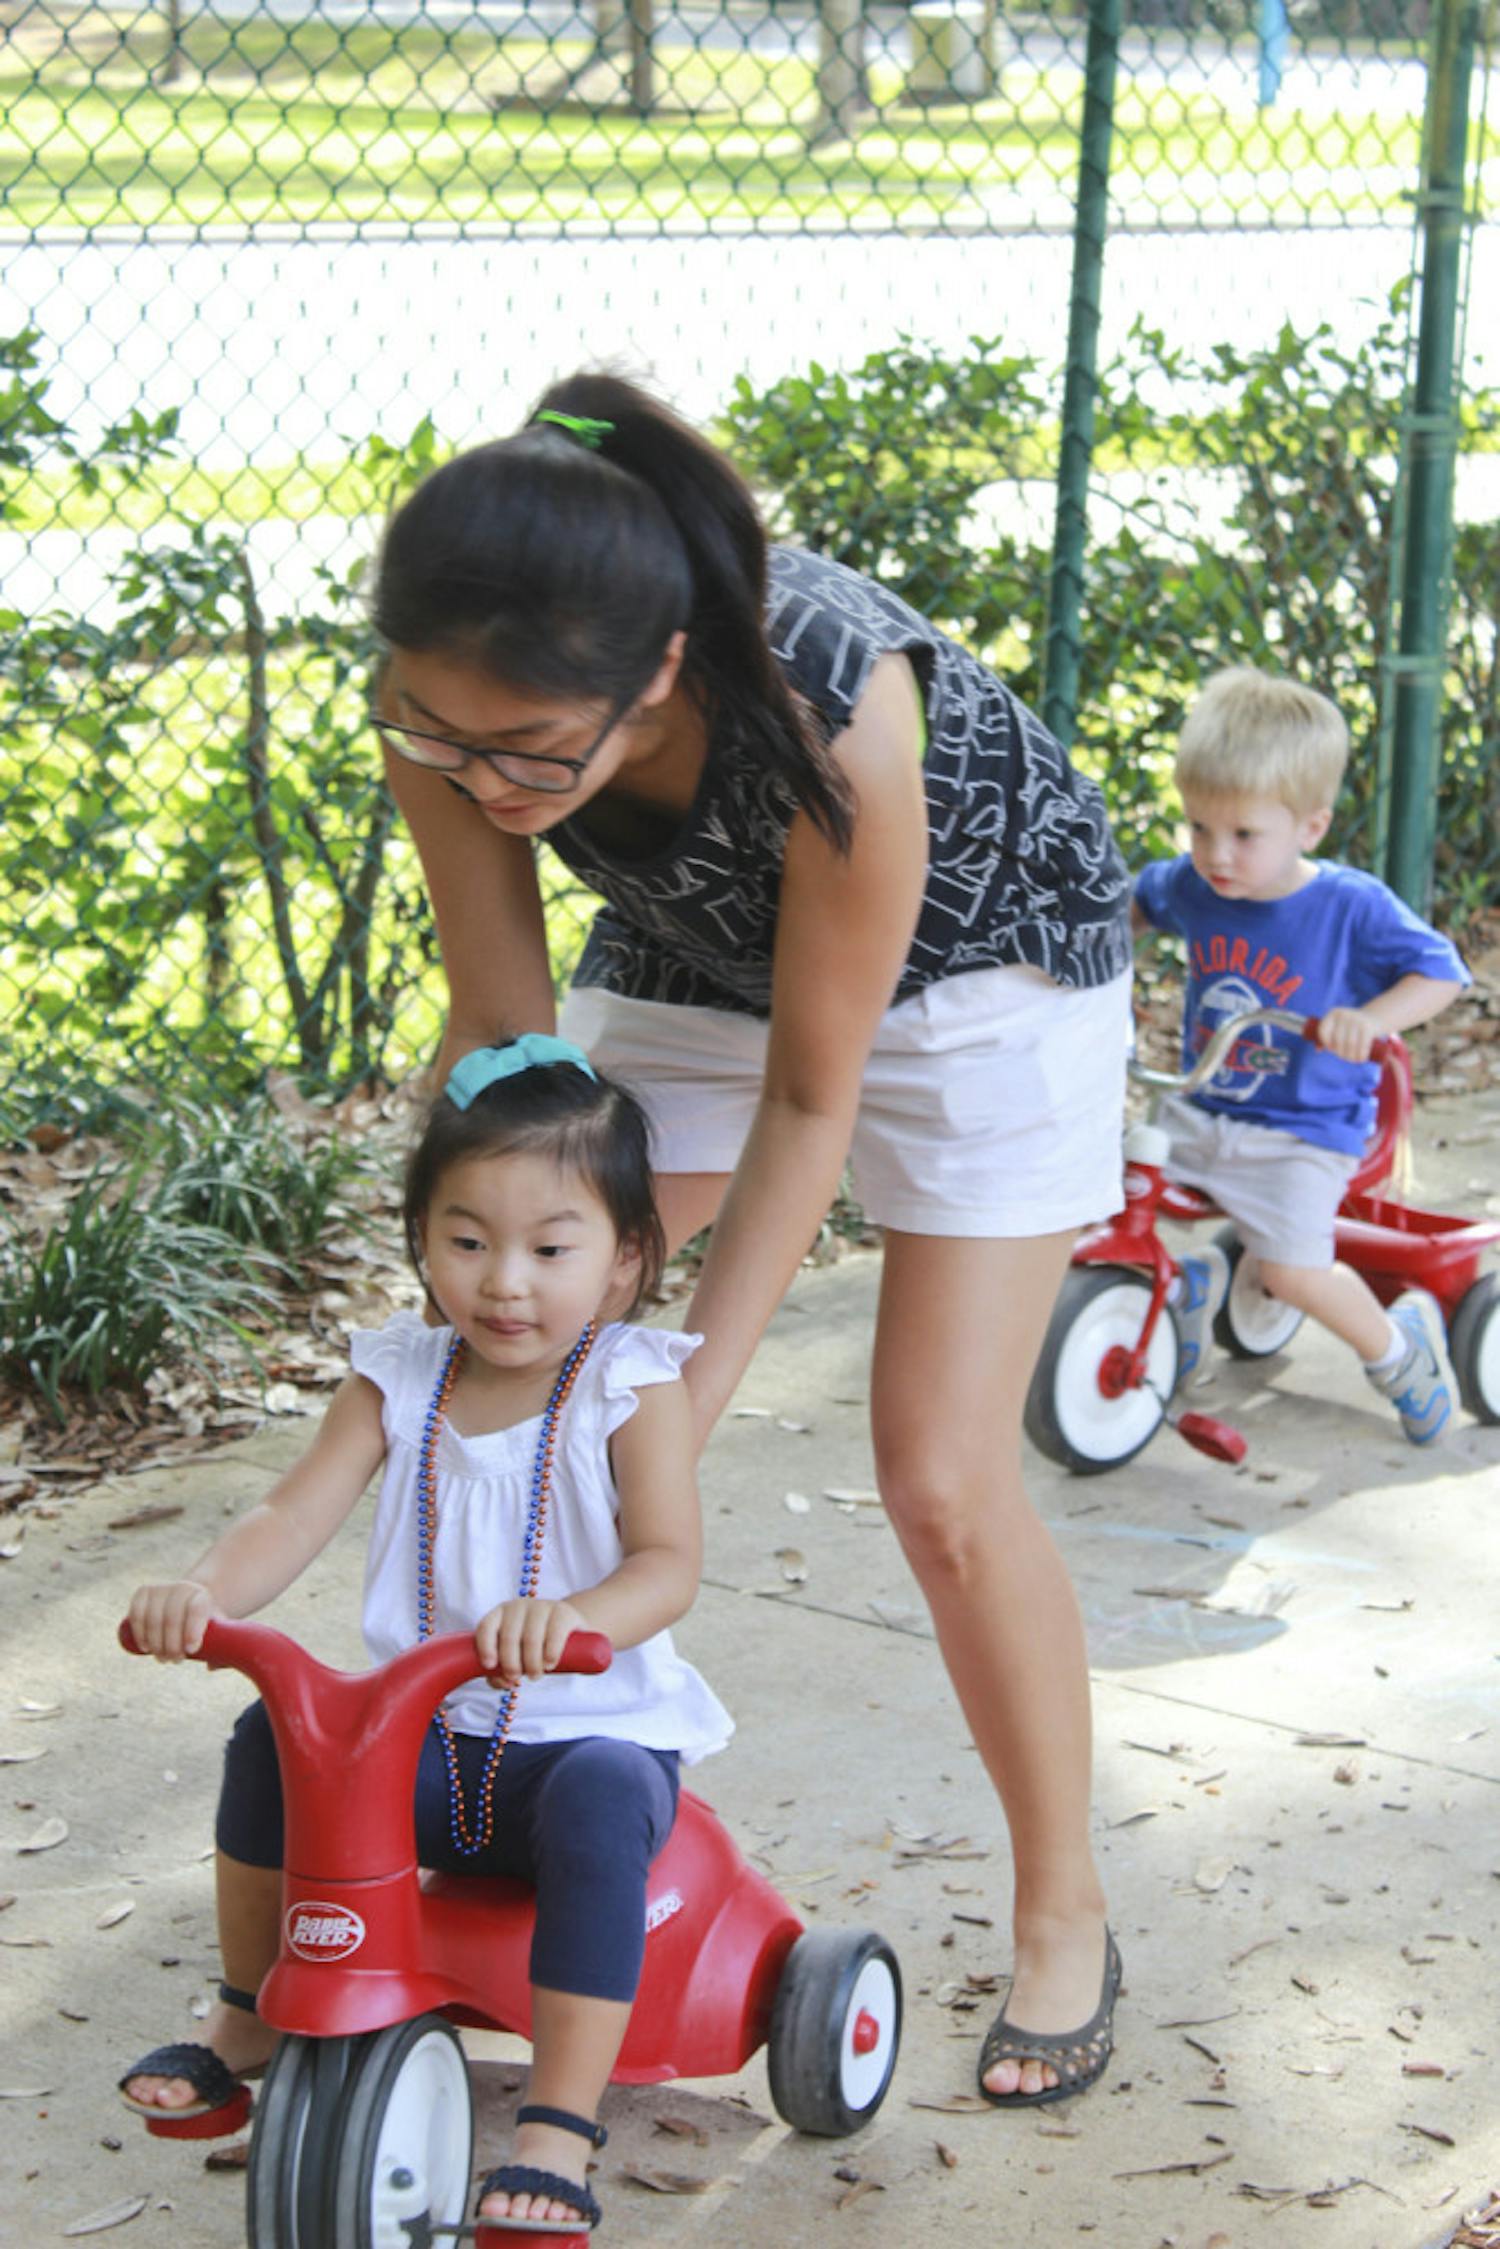 Former UF PhD student Soon Hye Yang, 34, pushes her 3-year-old daughter, Isu Yoon, on a tricycle at the Baby Gator daycare center on Nov. 5, 2015. Baby Gator’s request for additional funding was denied, and without it, student parents like Yang may be cut from the program.